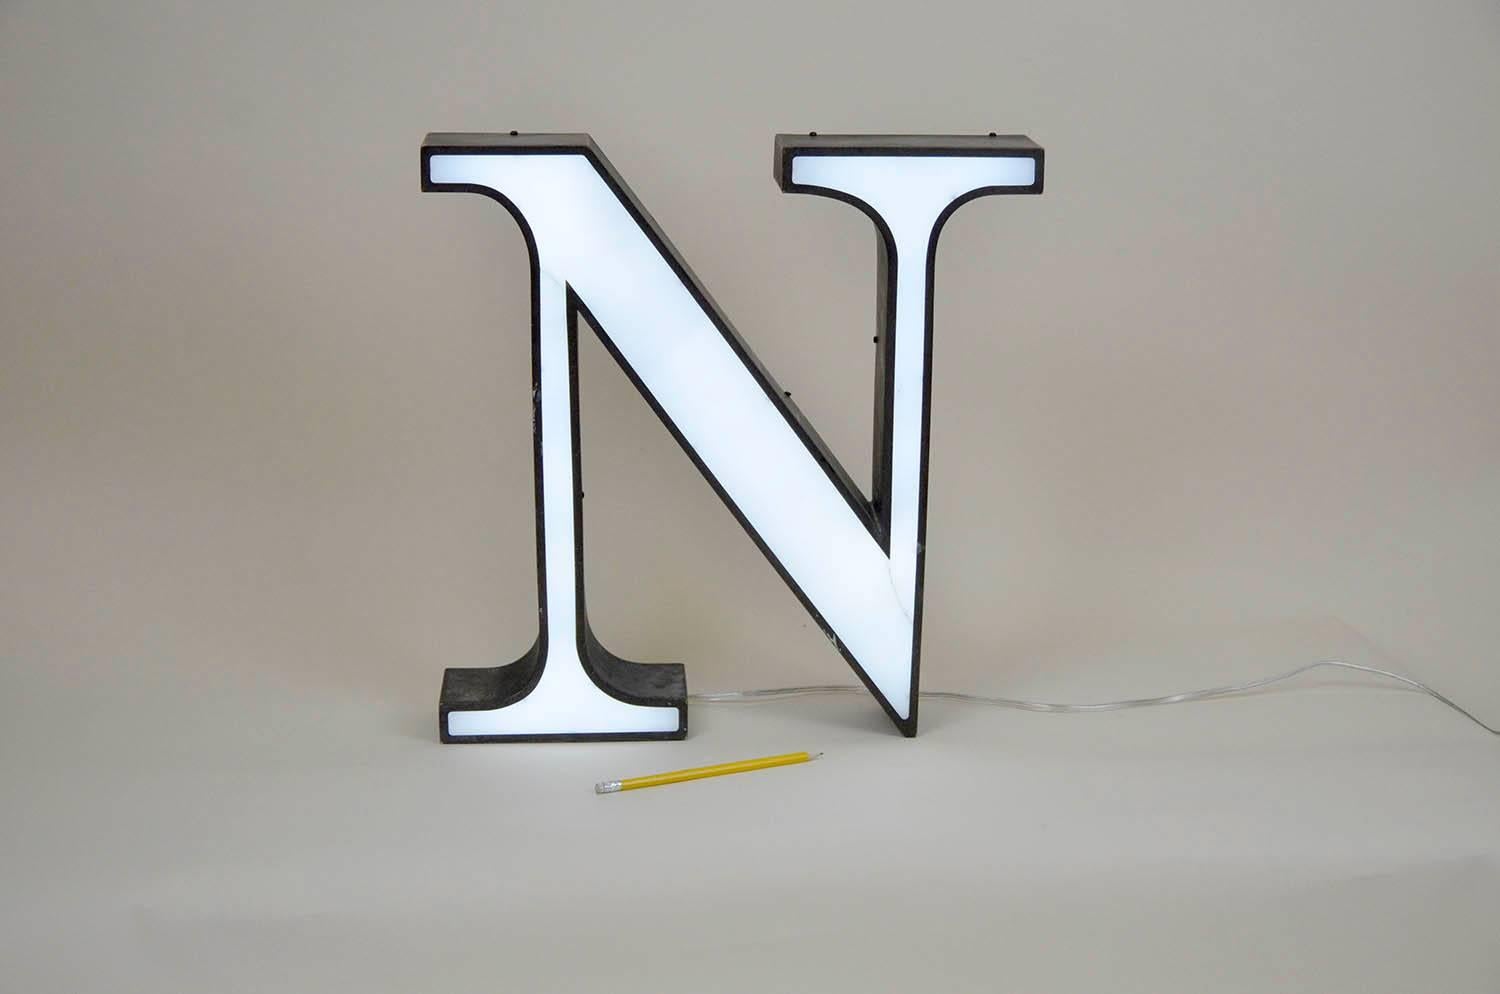 Mid-Century Modern 1970s Italian Vintage Light Letter N in White and Metal Profile